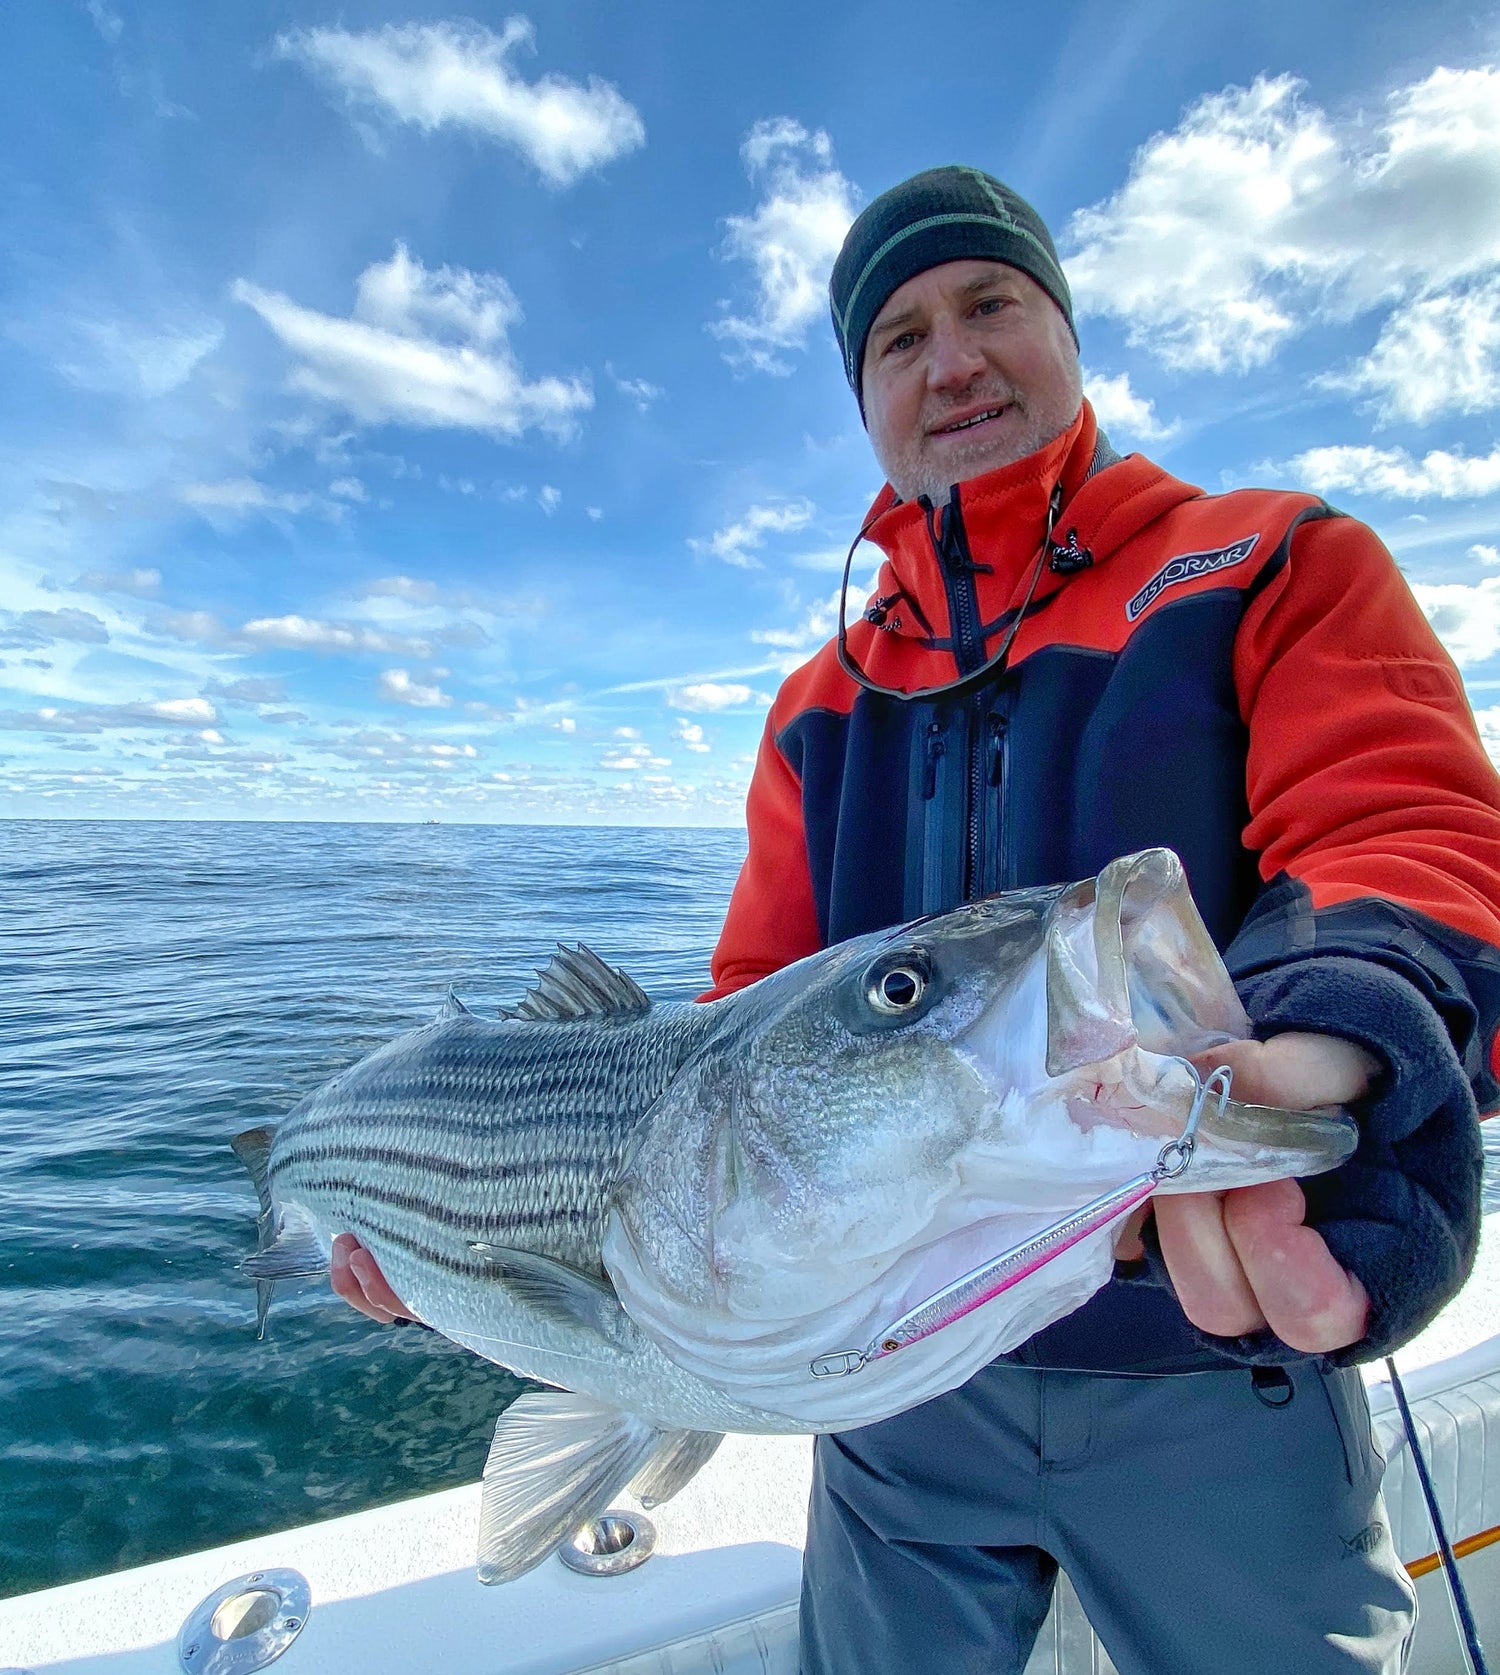 How To: Casting to Blitzing Striped Bass with the Hogy Sand Eel Jig off of New Jersey